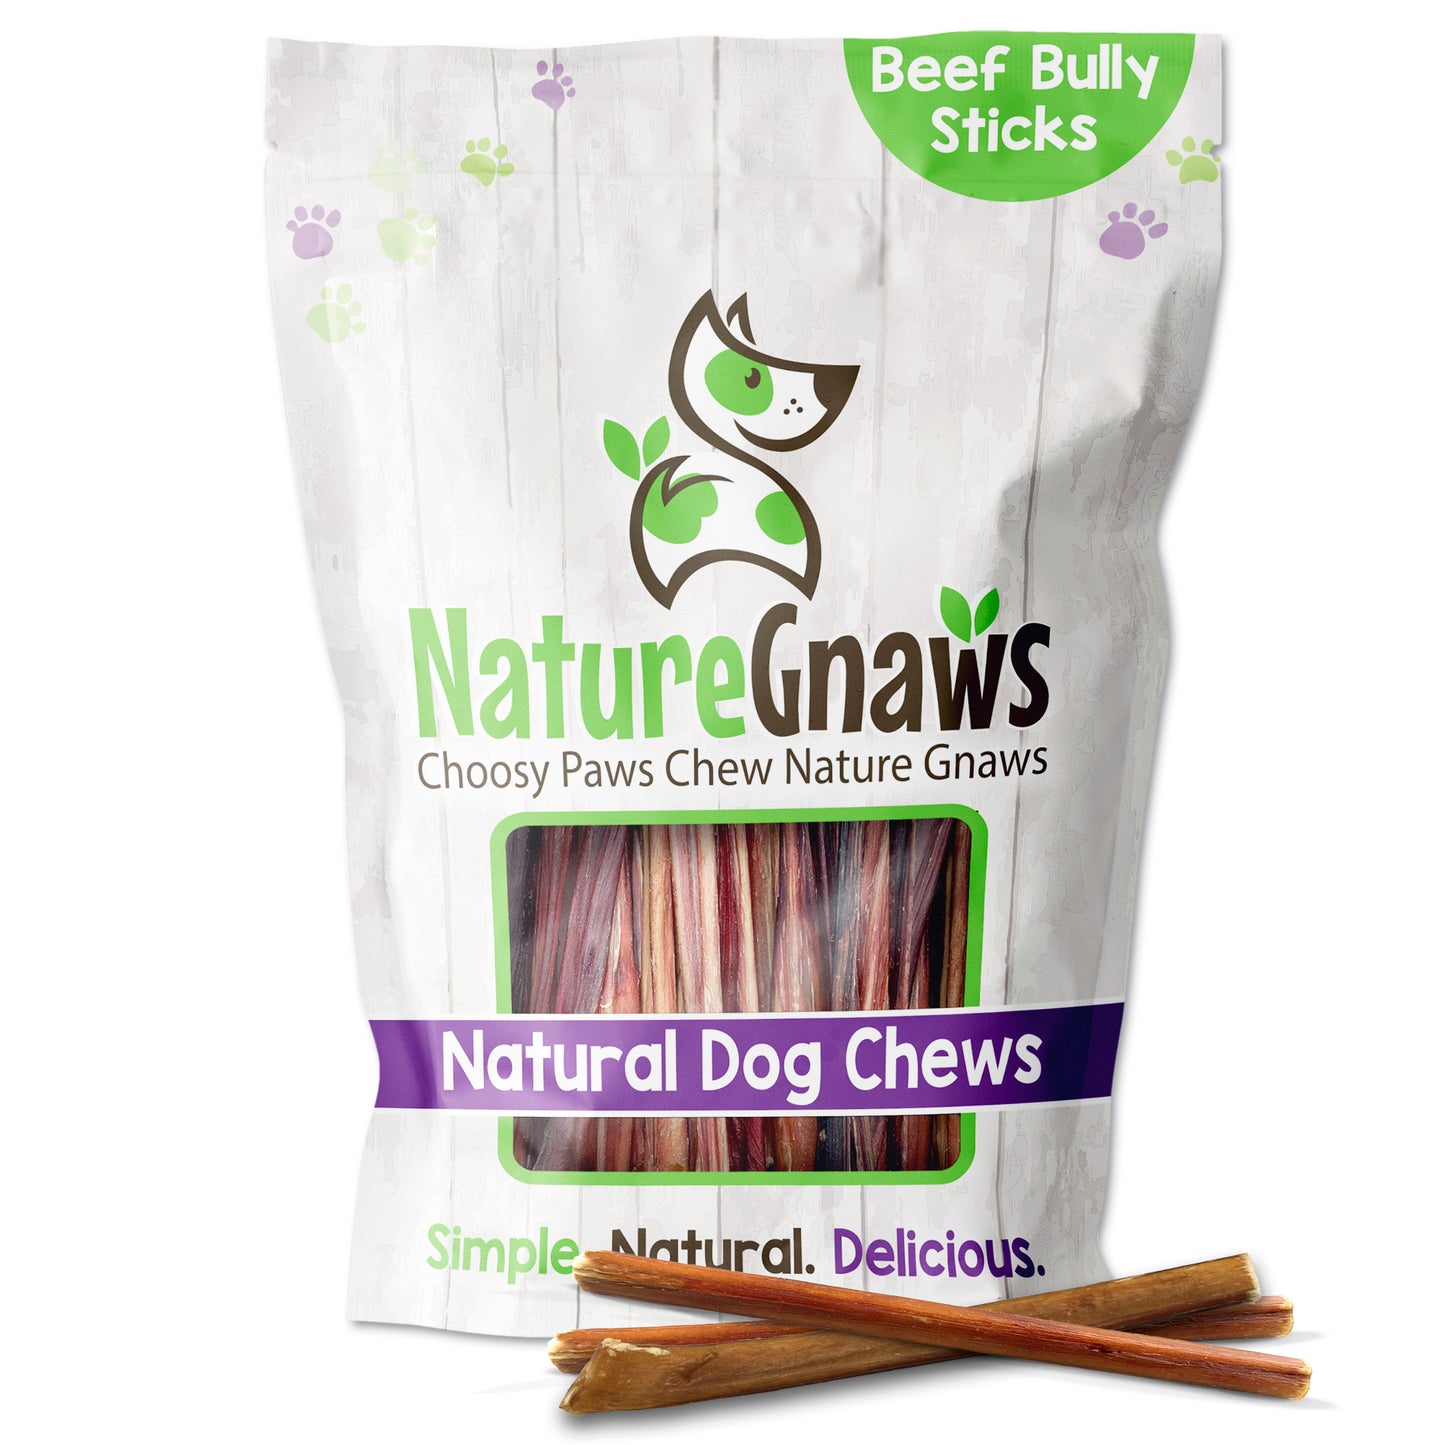 Extra thin bully sticks 6" front of bag with product in front